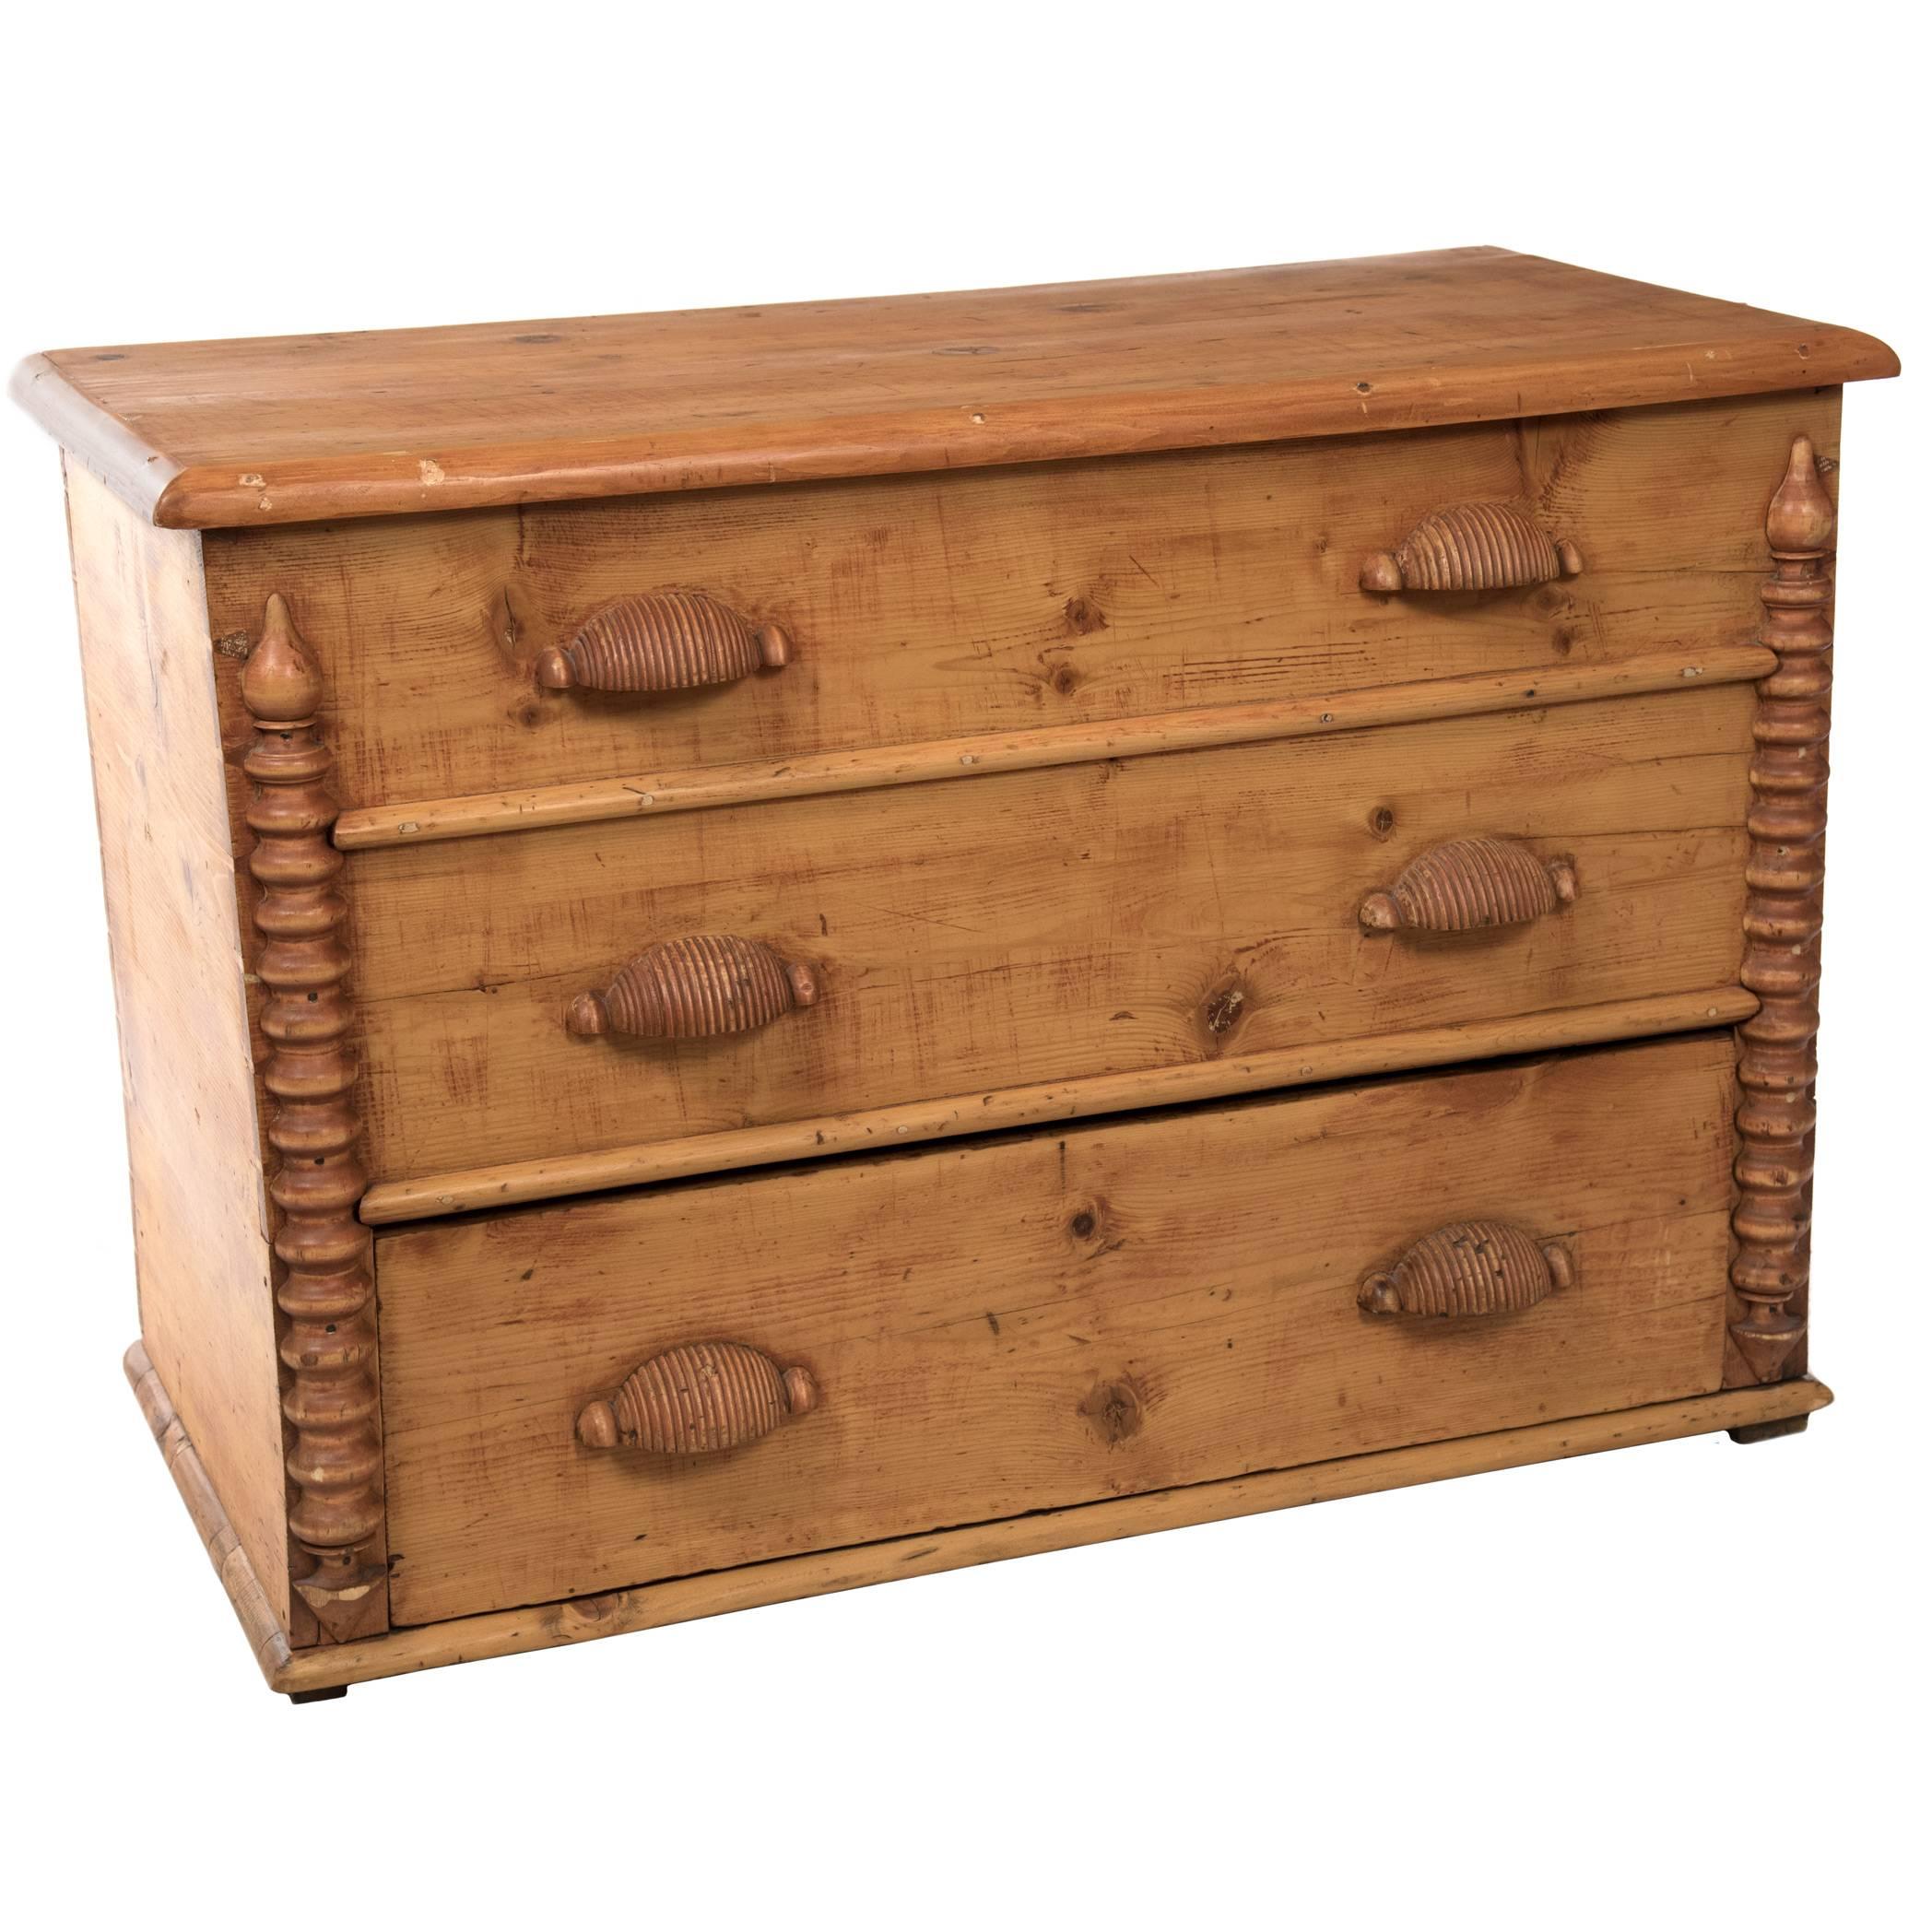 Mormon Pioneer Pine Mule Chest with Berry Stain and Beehive Handles